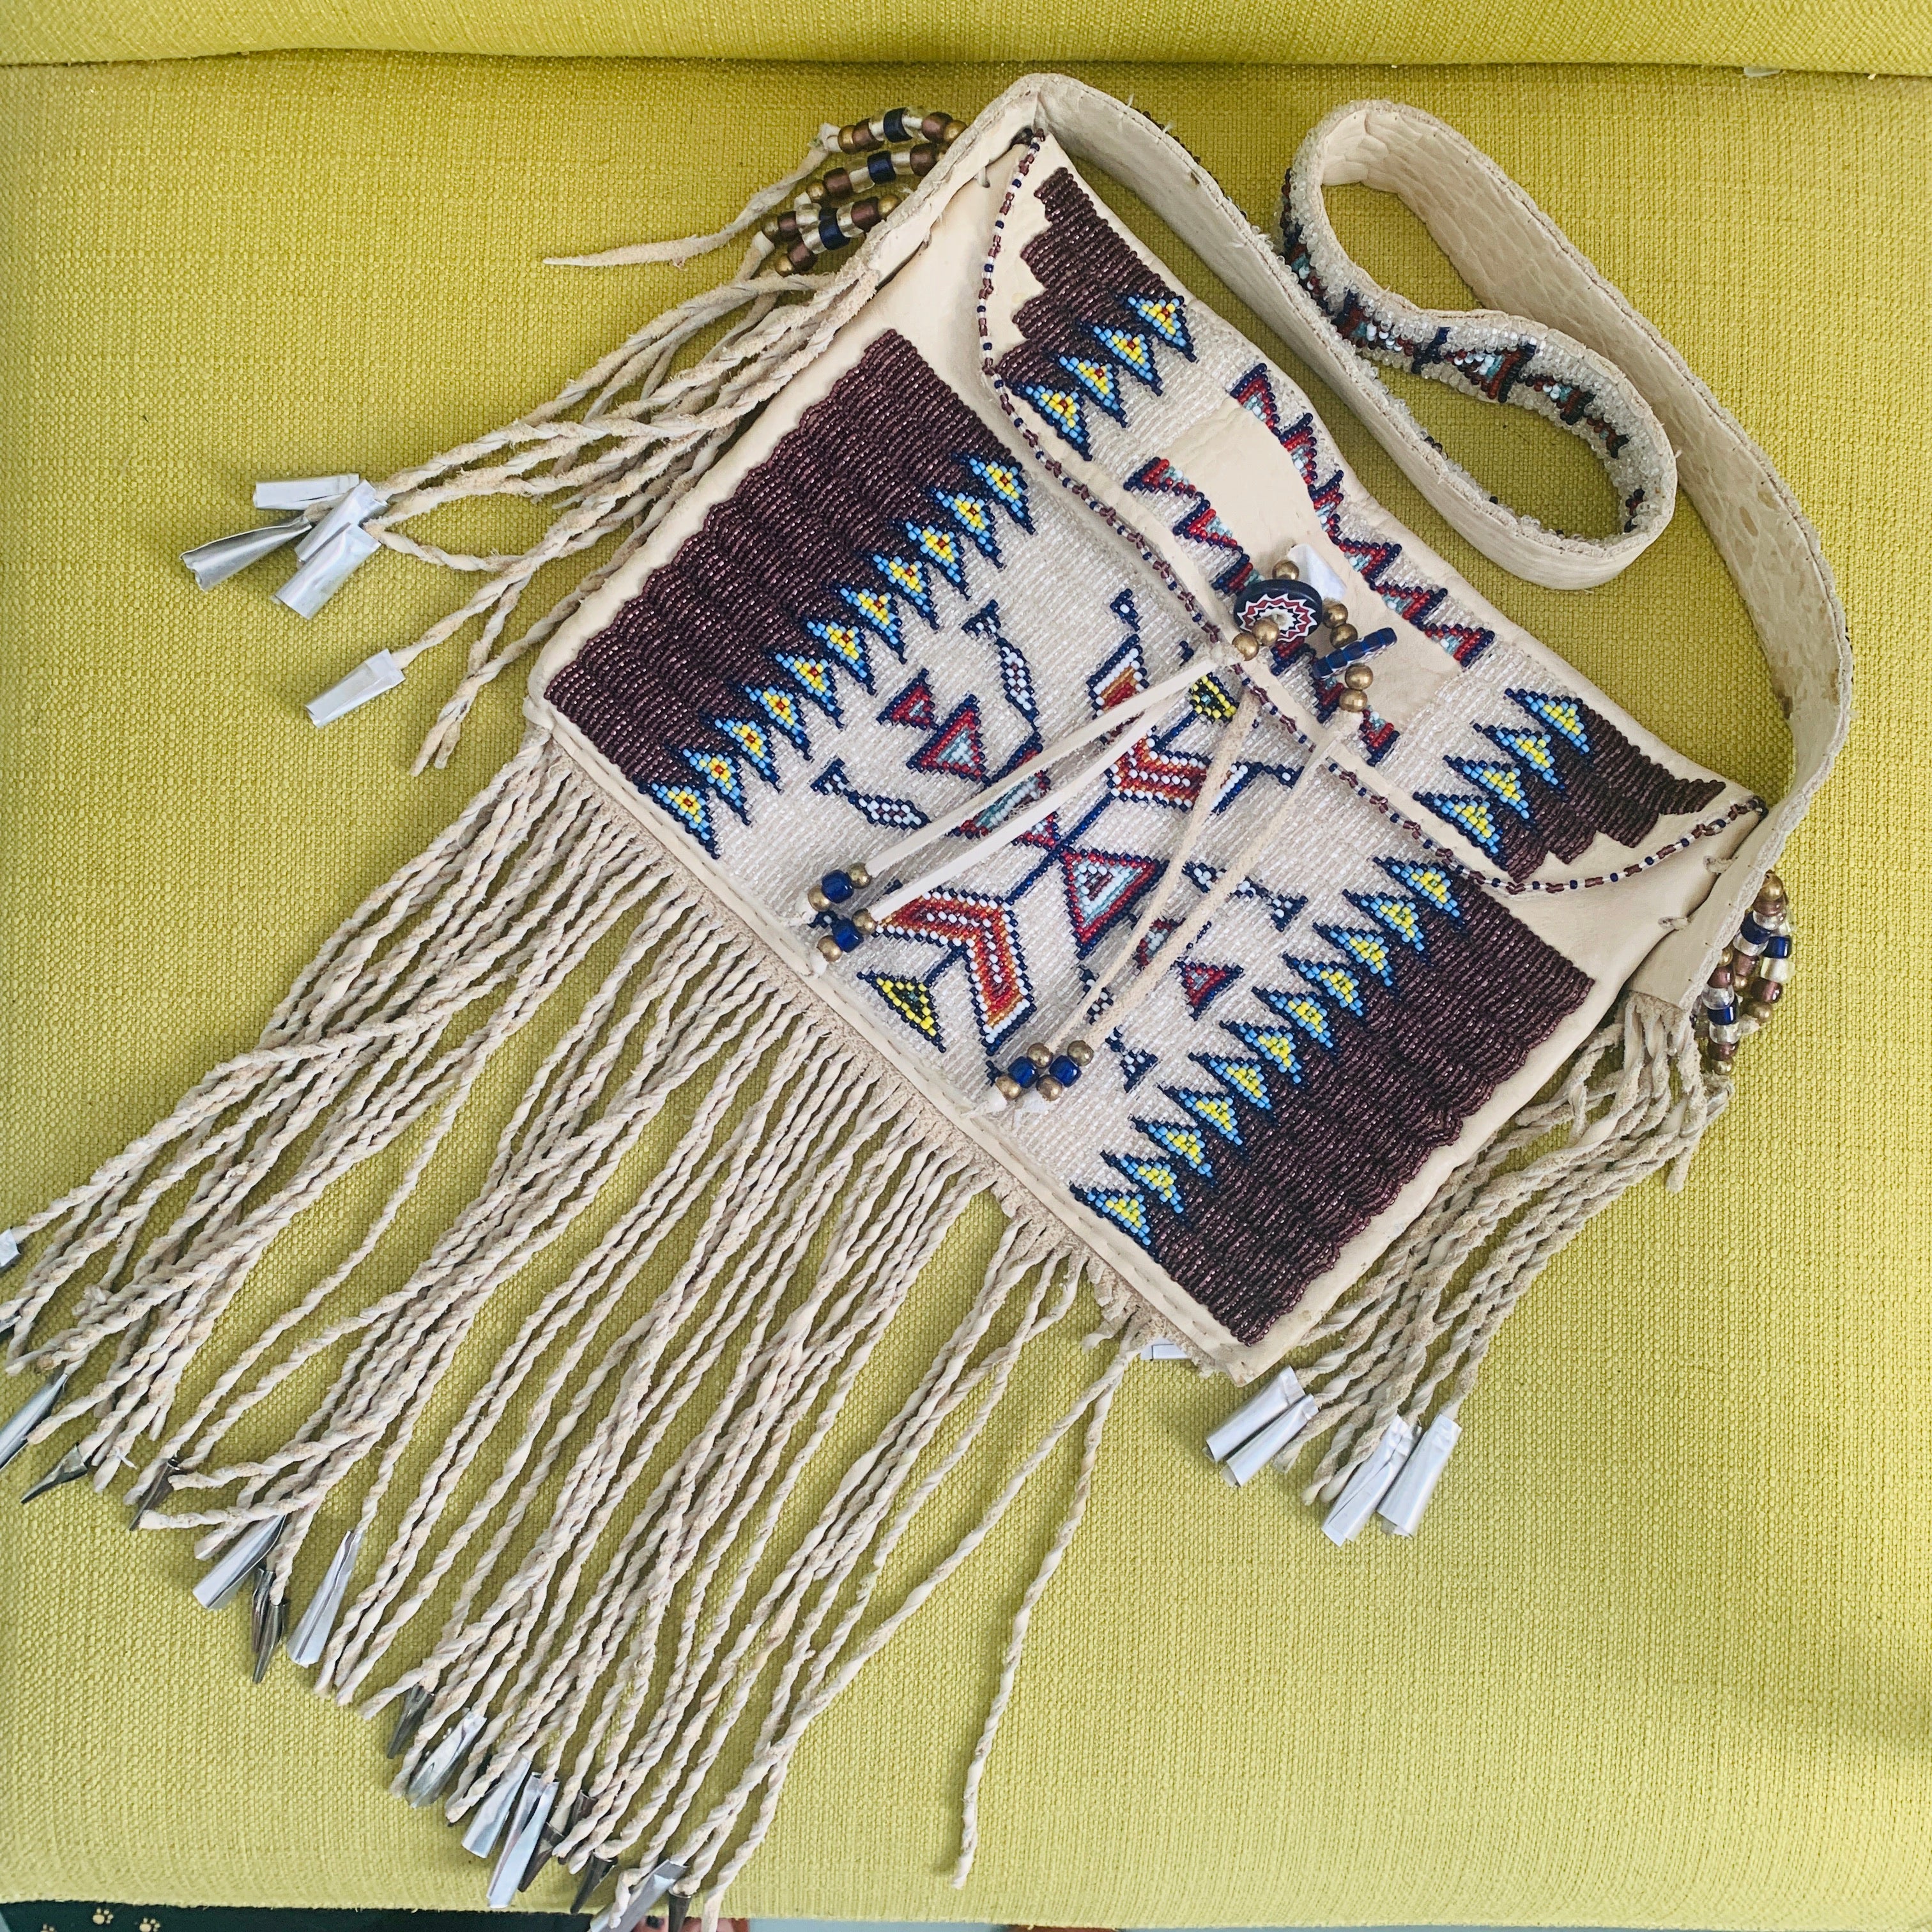 Native american style fringe purse. Made with 100% vegan materials